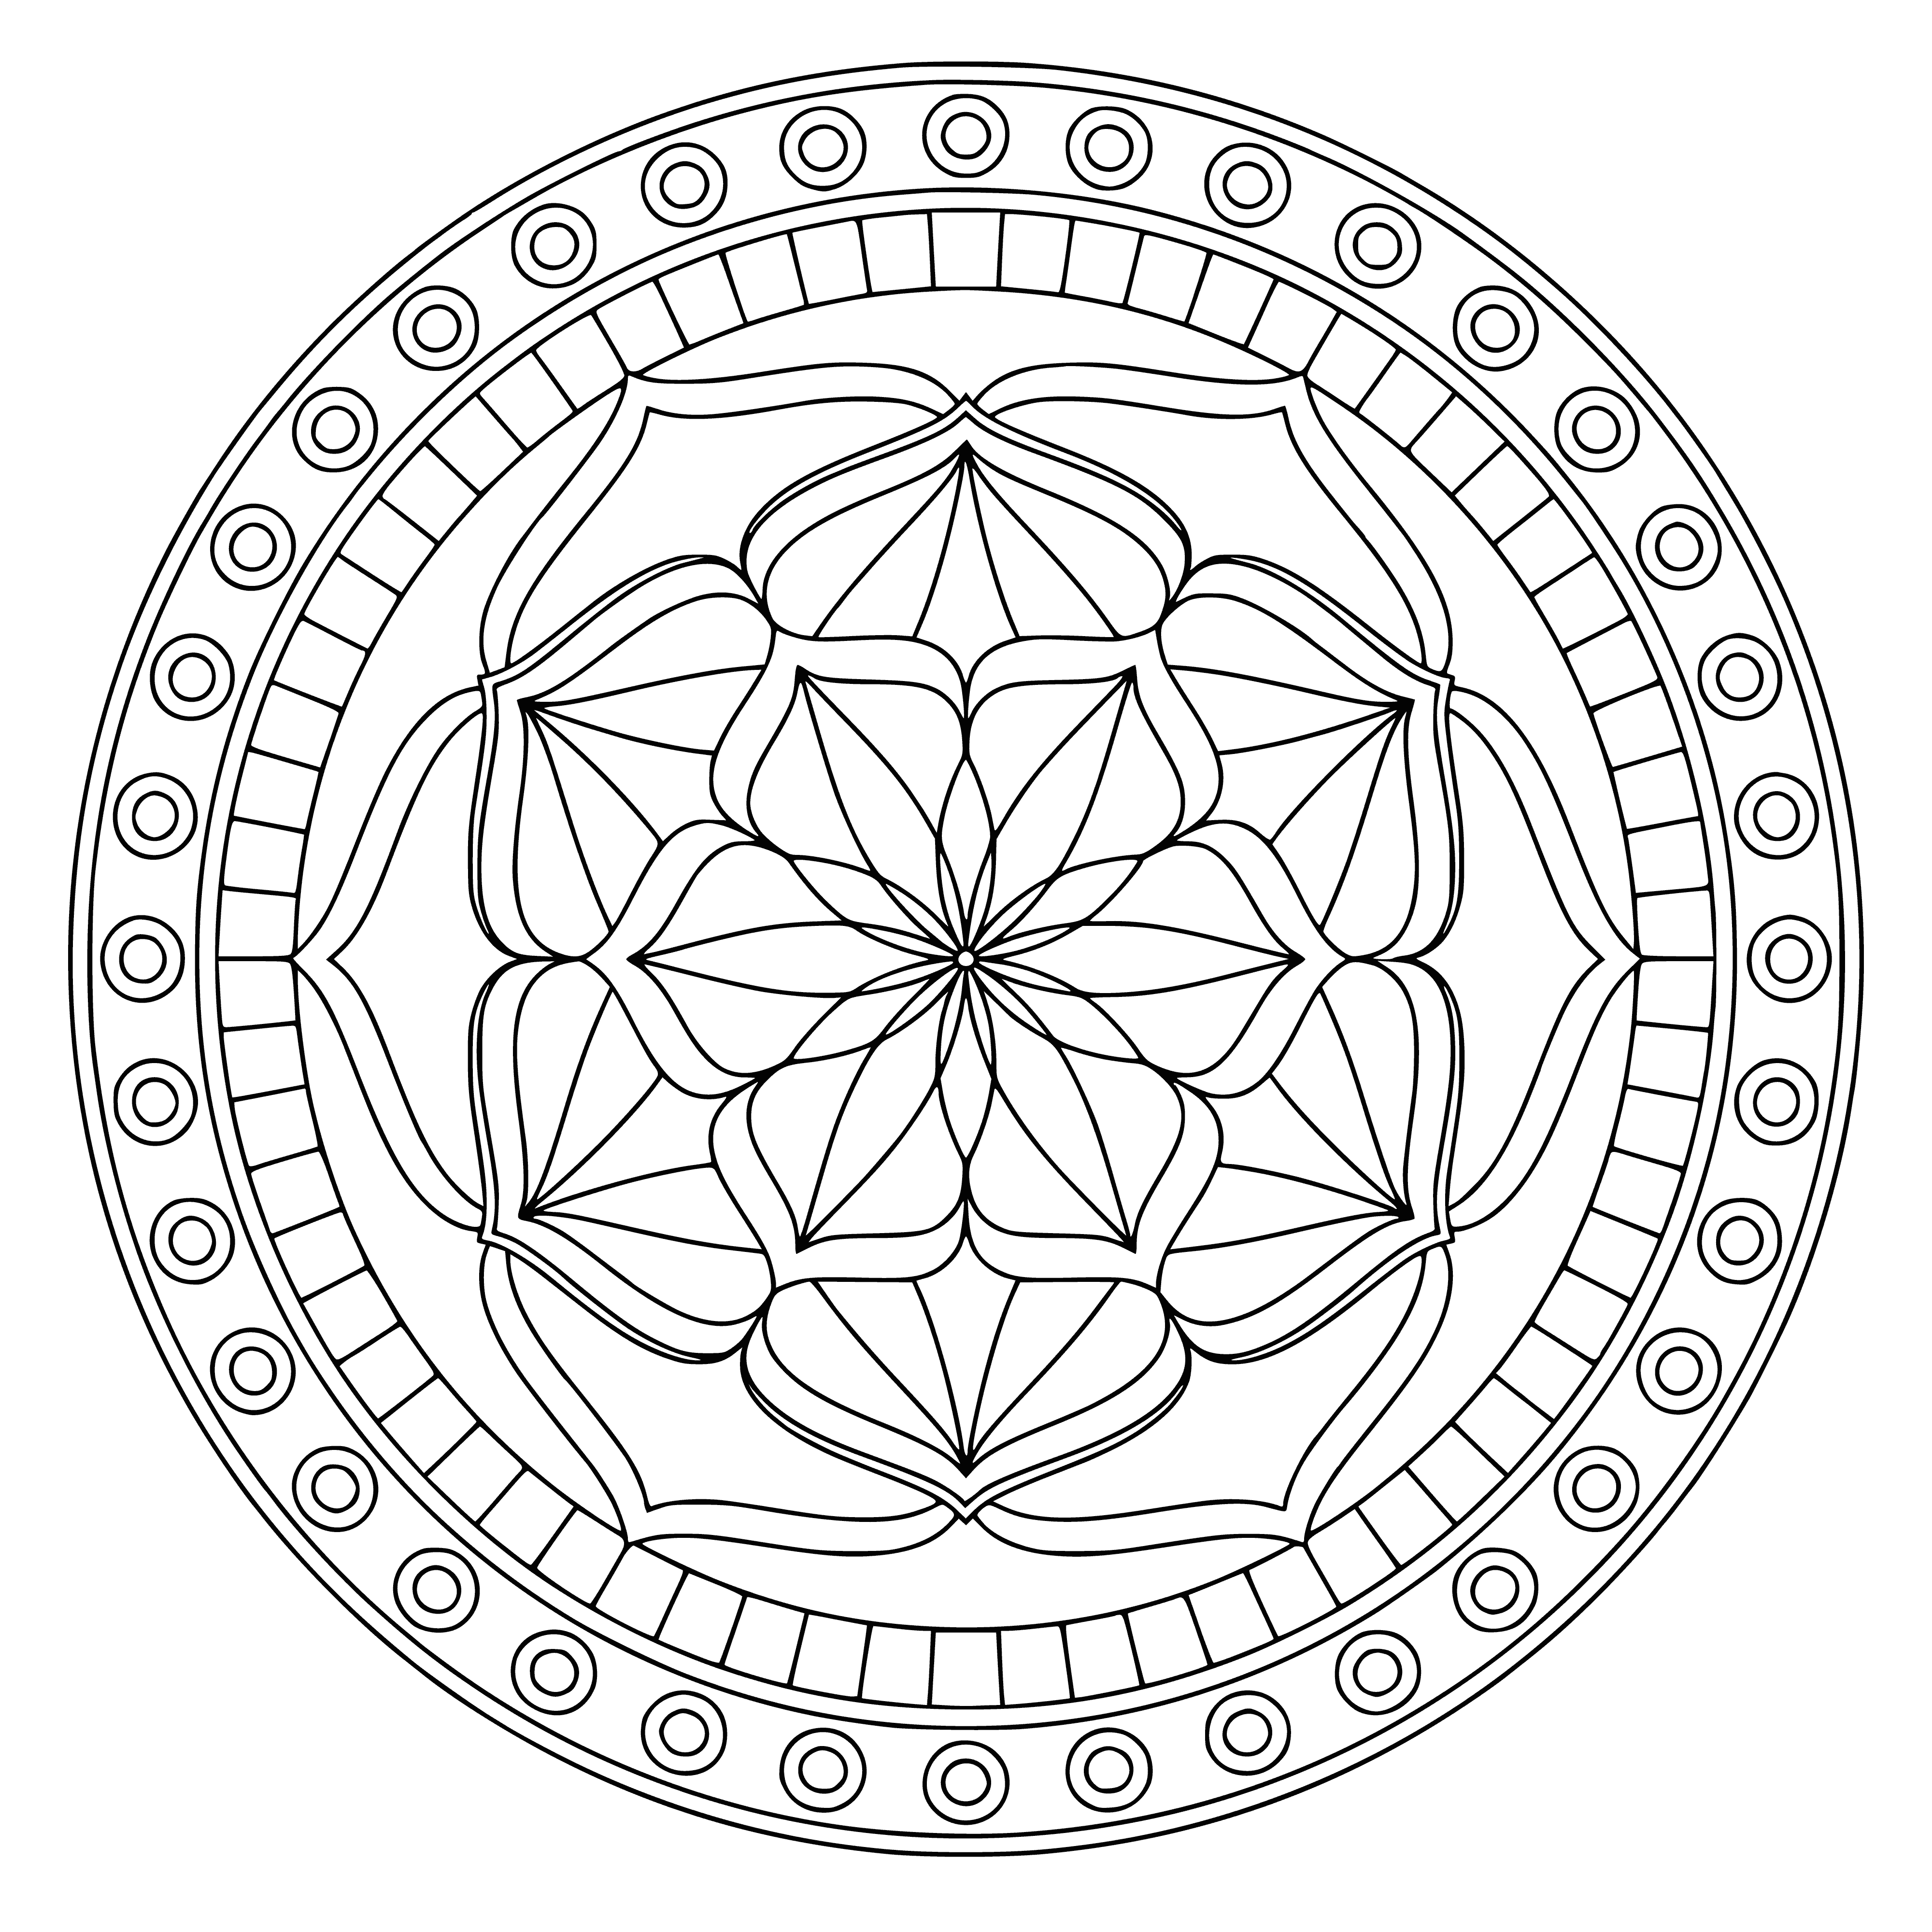 coloring page: Coloring page of flower mandala w/ big flower in middle & petals of purple, blue, pink, & green. Smaller flowers around & background is white.